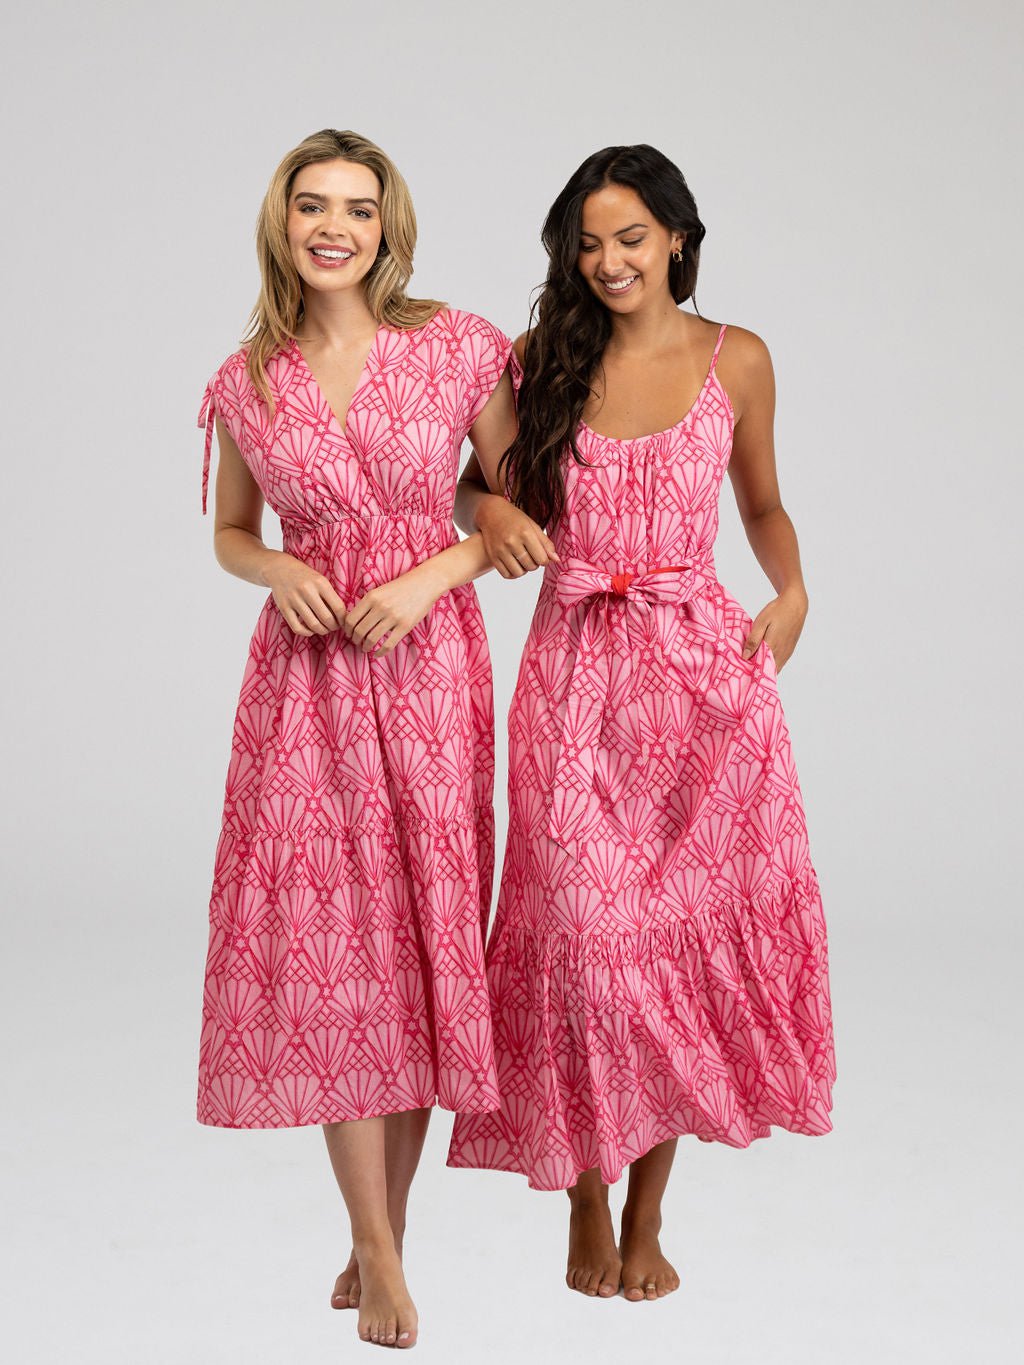 Beau & Ro Dress Small SAMPLE | The Blaire Dress | Starburst Pink | Small